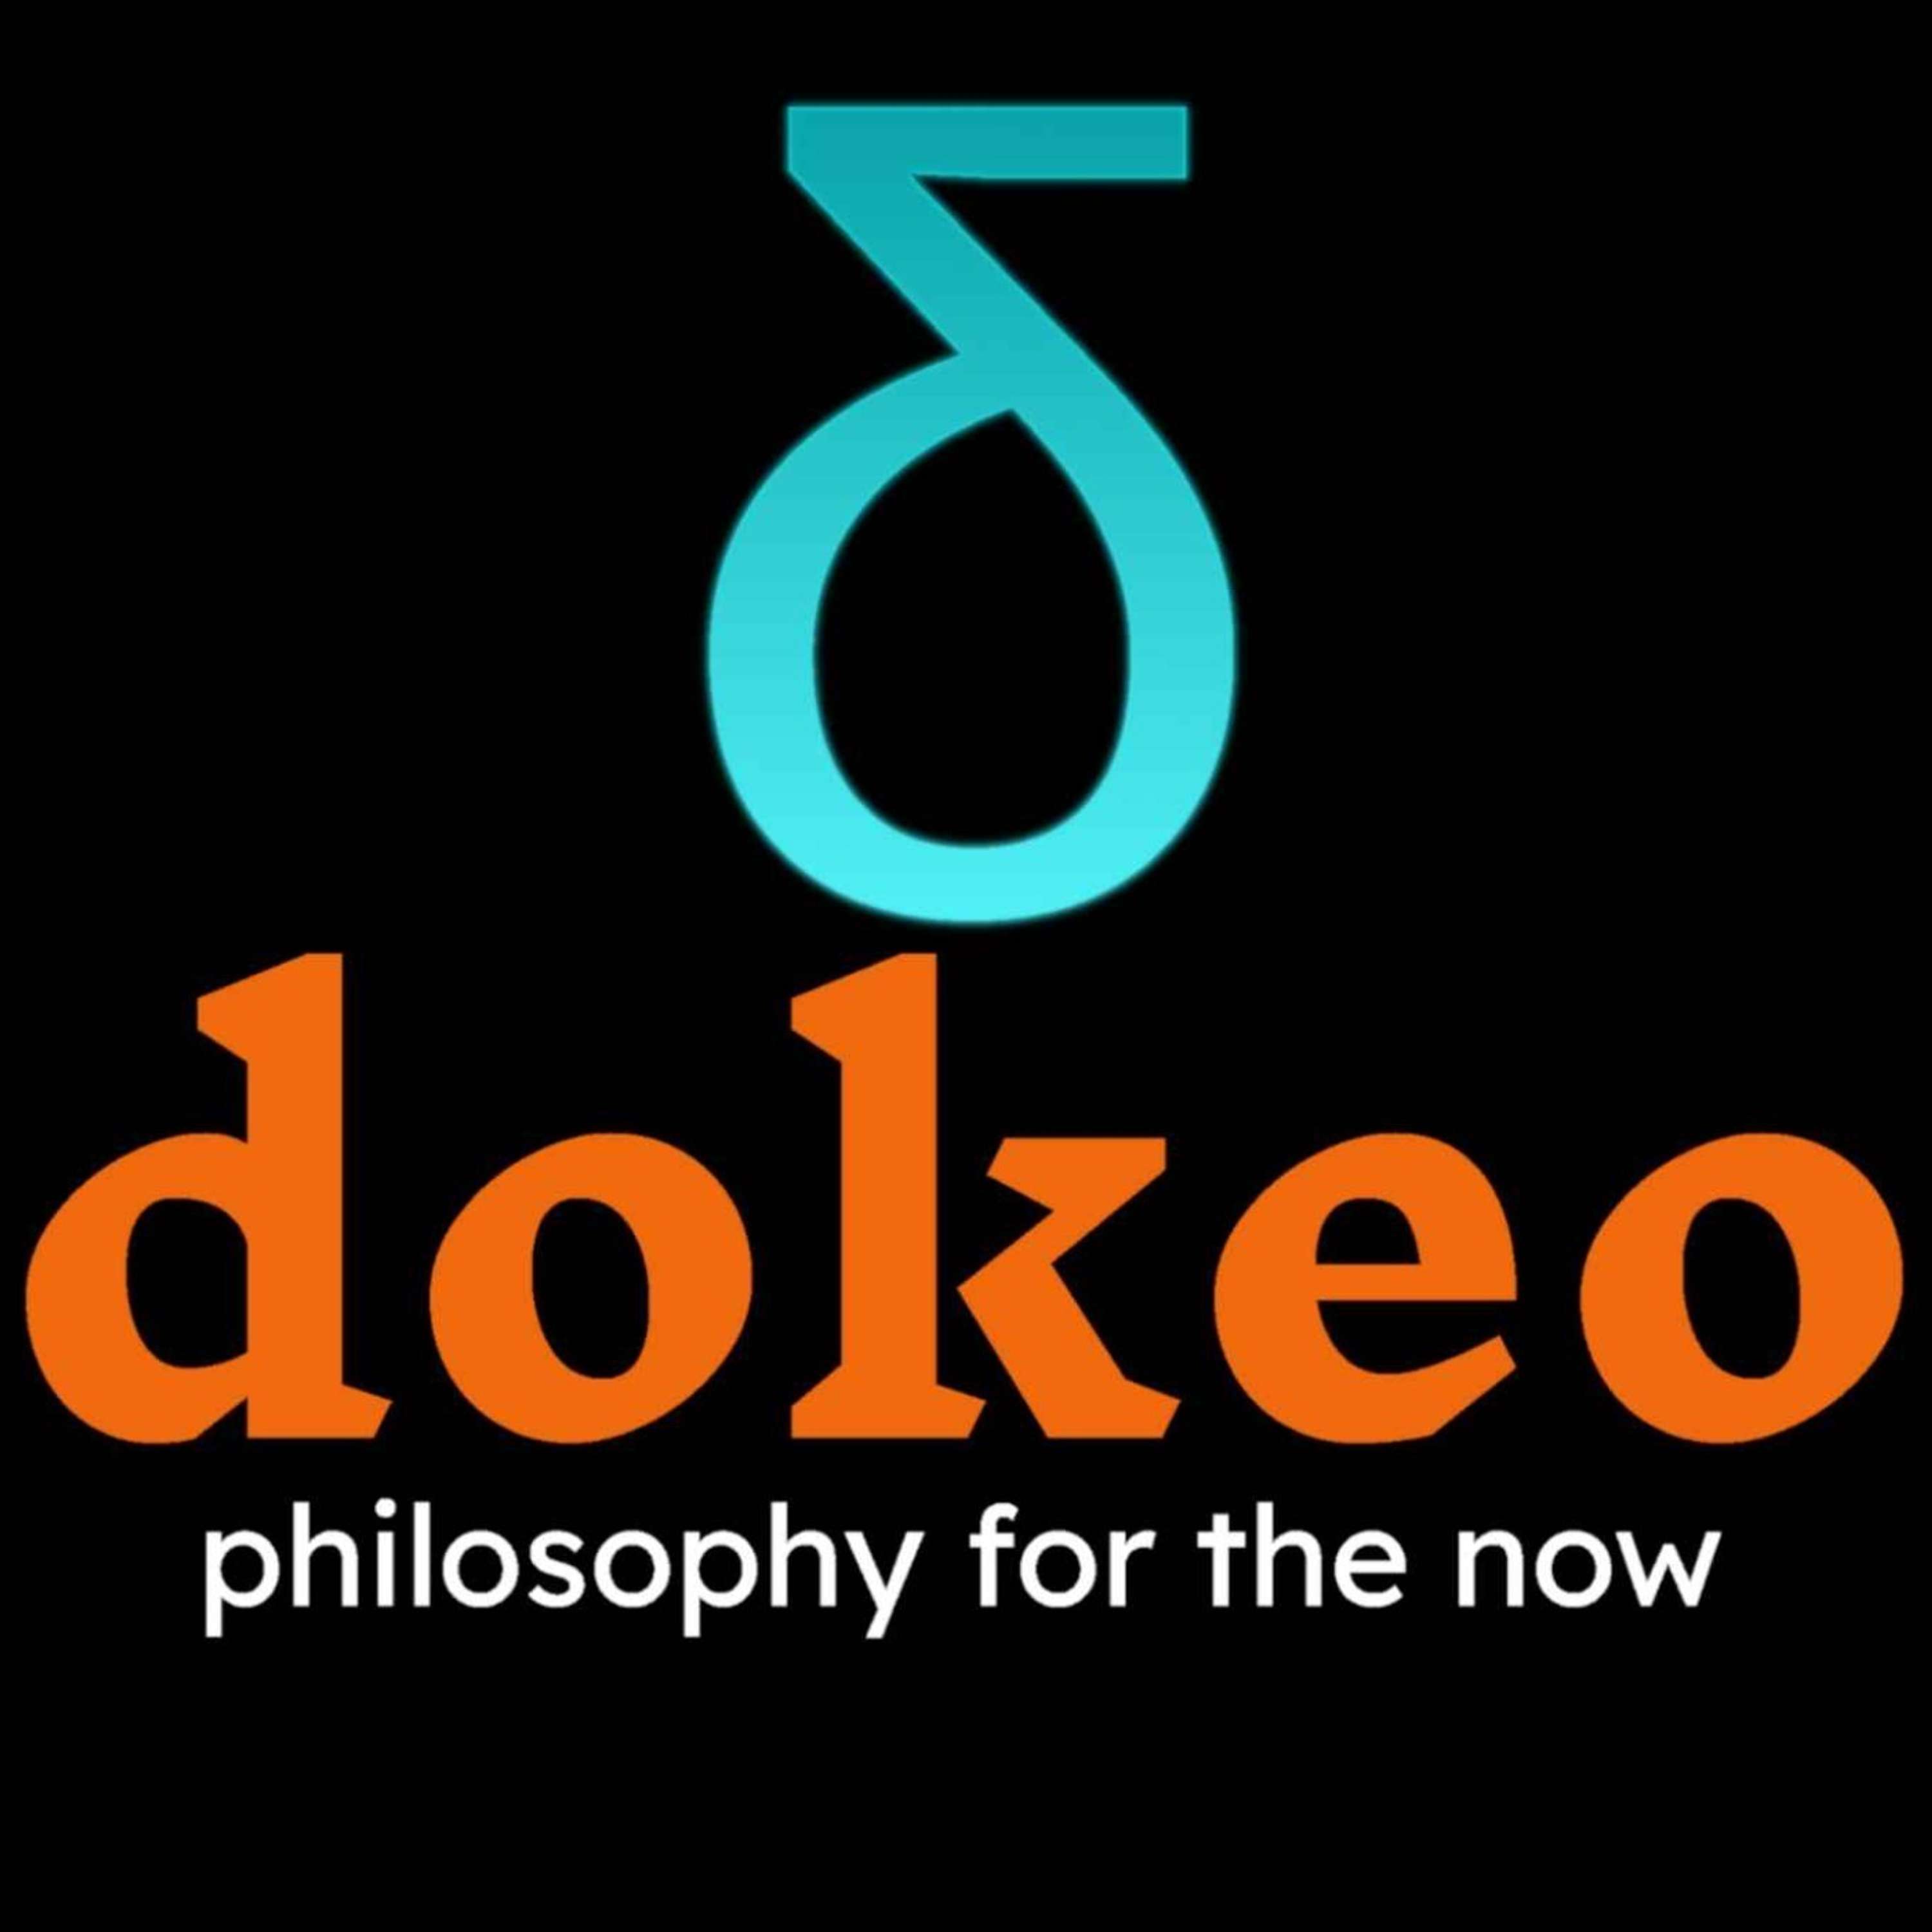 Introduction to the δ dokeo podcast